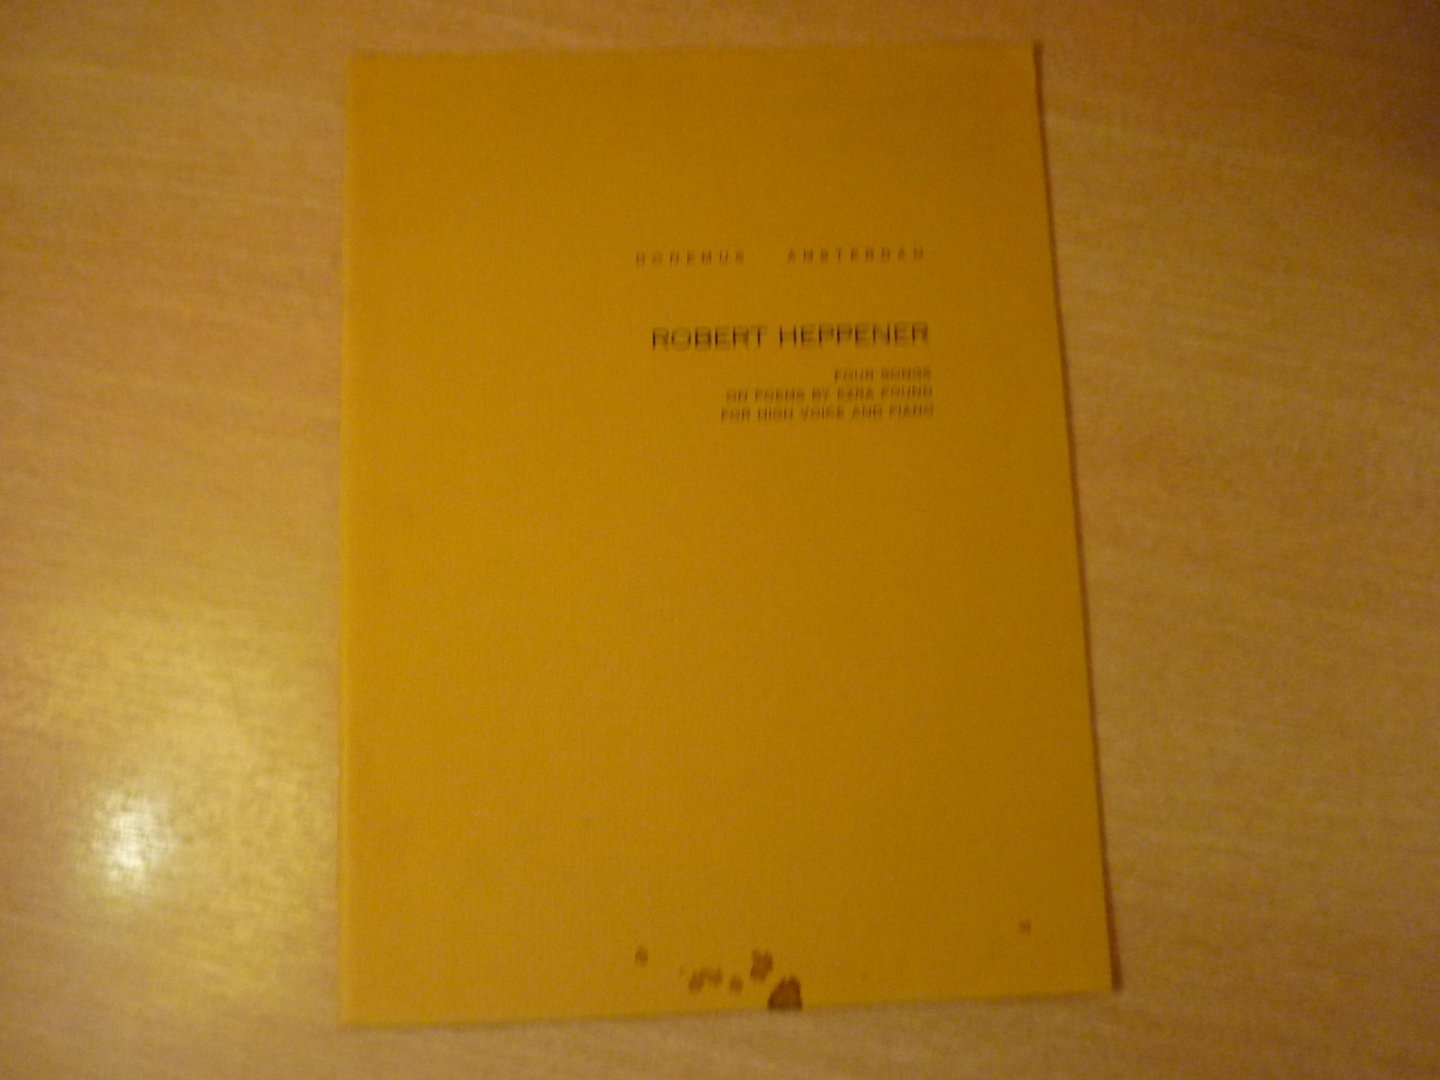 Heppener; Robert Four Songs on Poems by Ezra Pound - Four Songs on Poems by Ezra Pound; fot high voice and piano